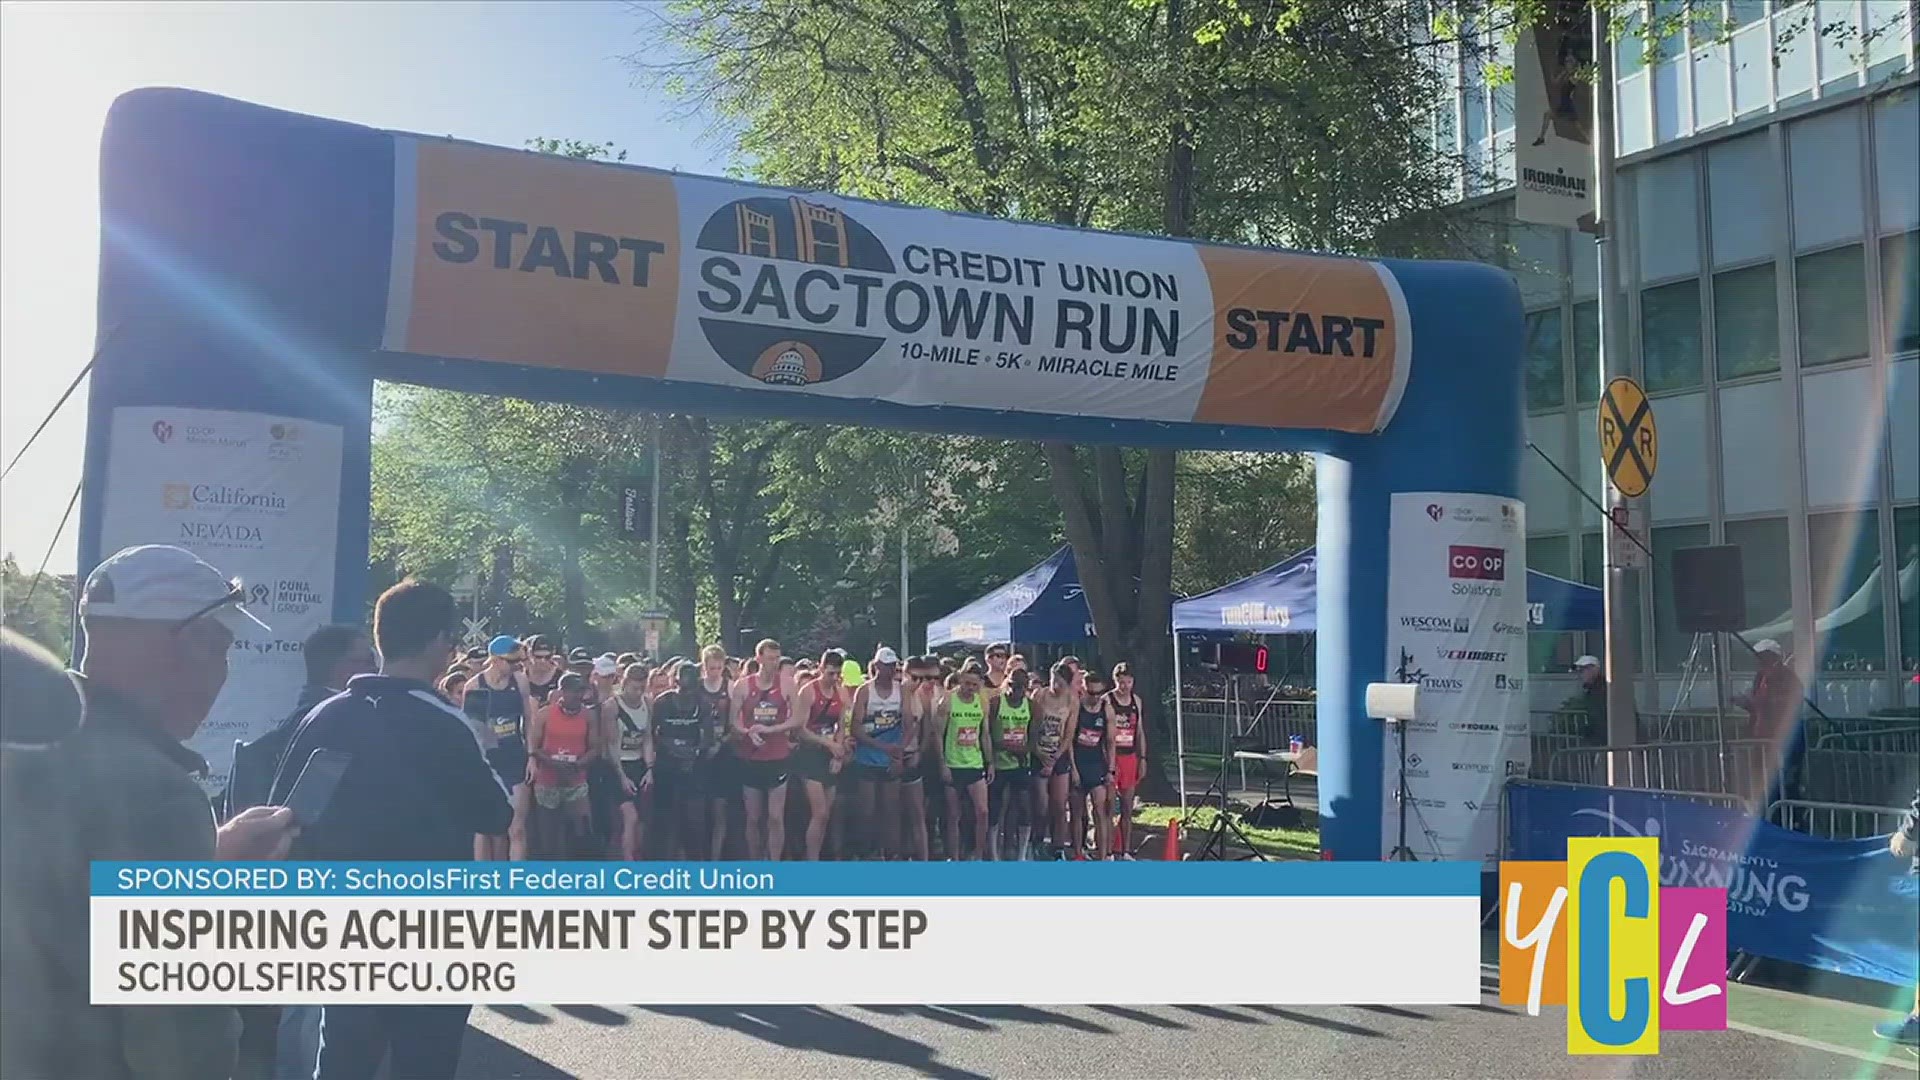 Grab your sneakers to race in the Credit Union SACTOWN Run that gets you up and moving while giving back to a great cause. This segment paid for by SchoolsFirst FCU.